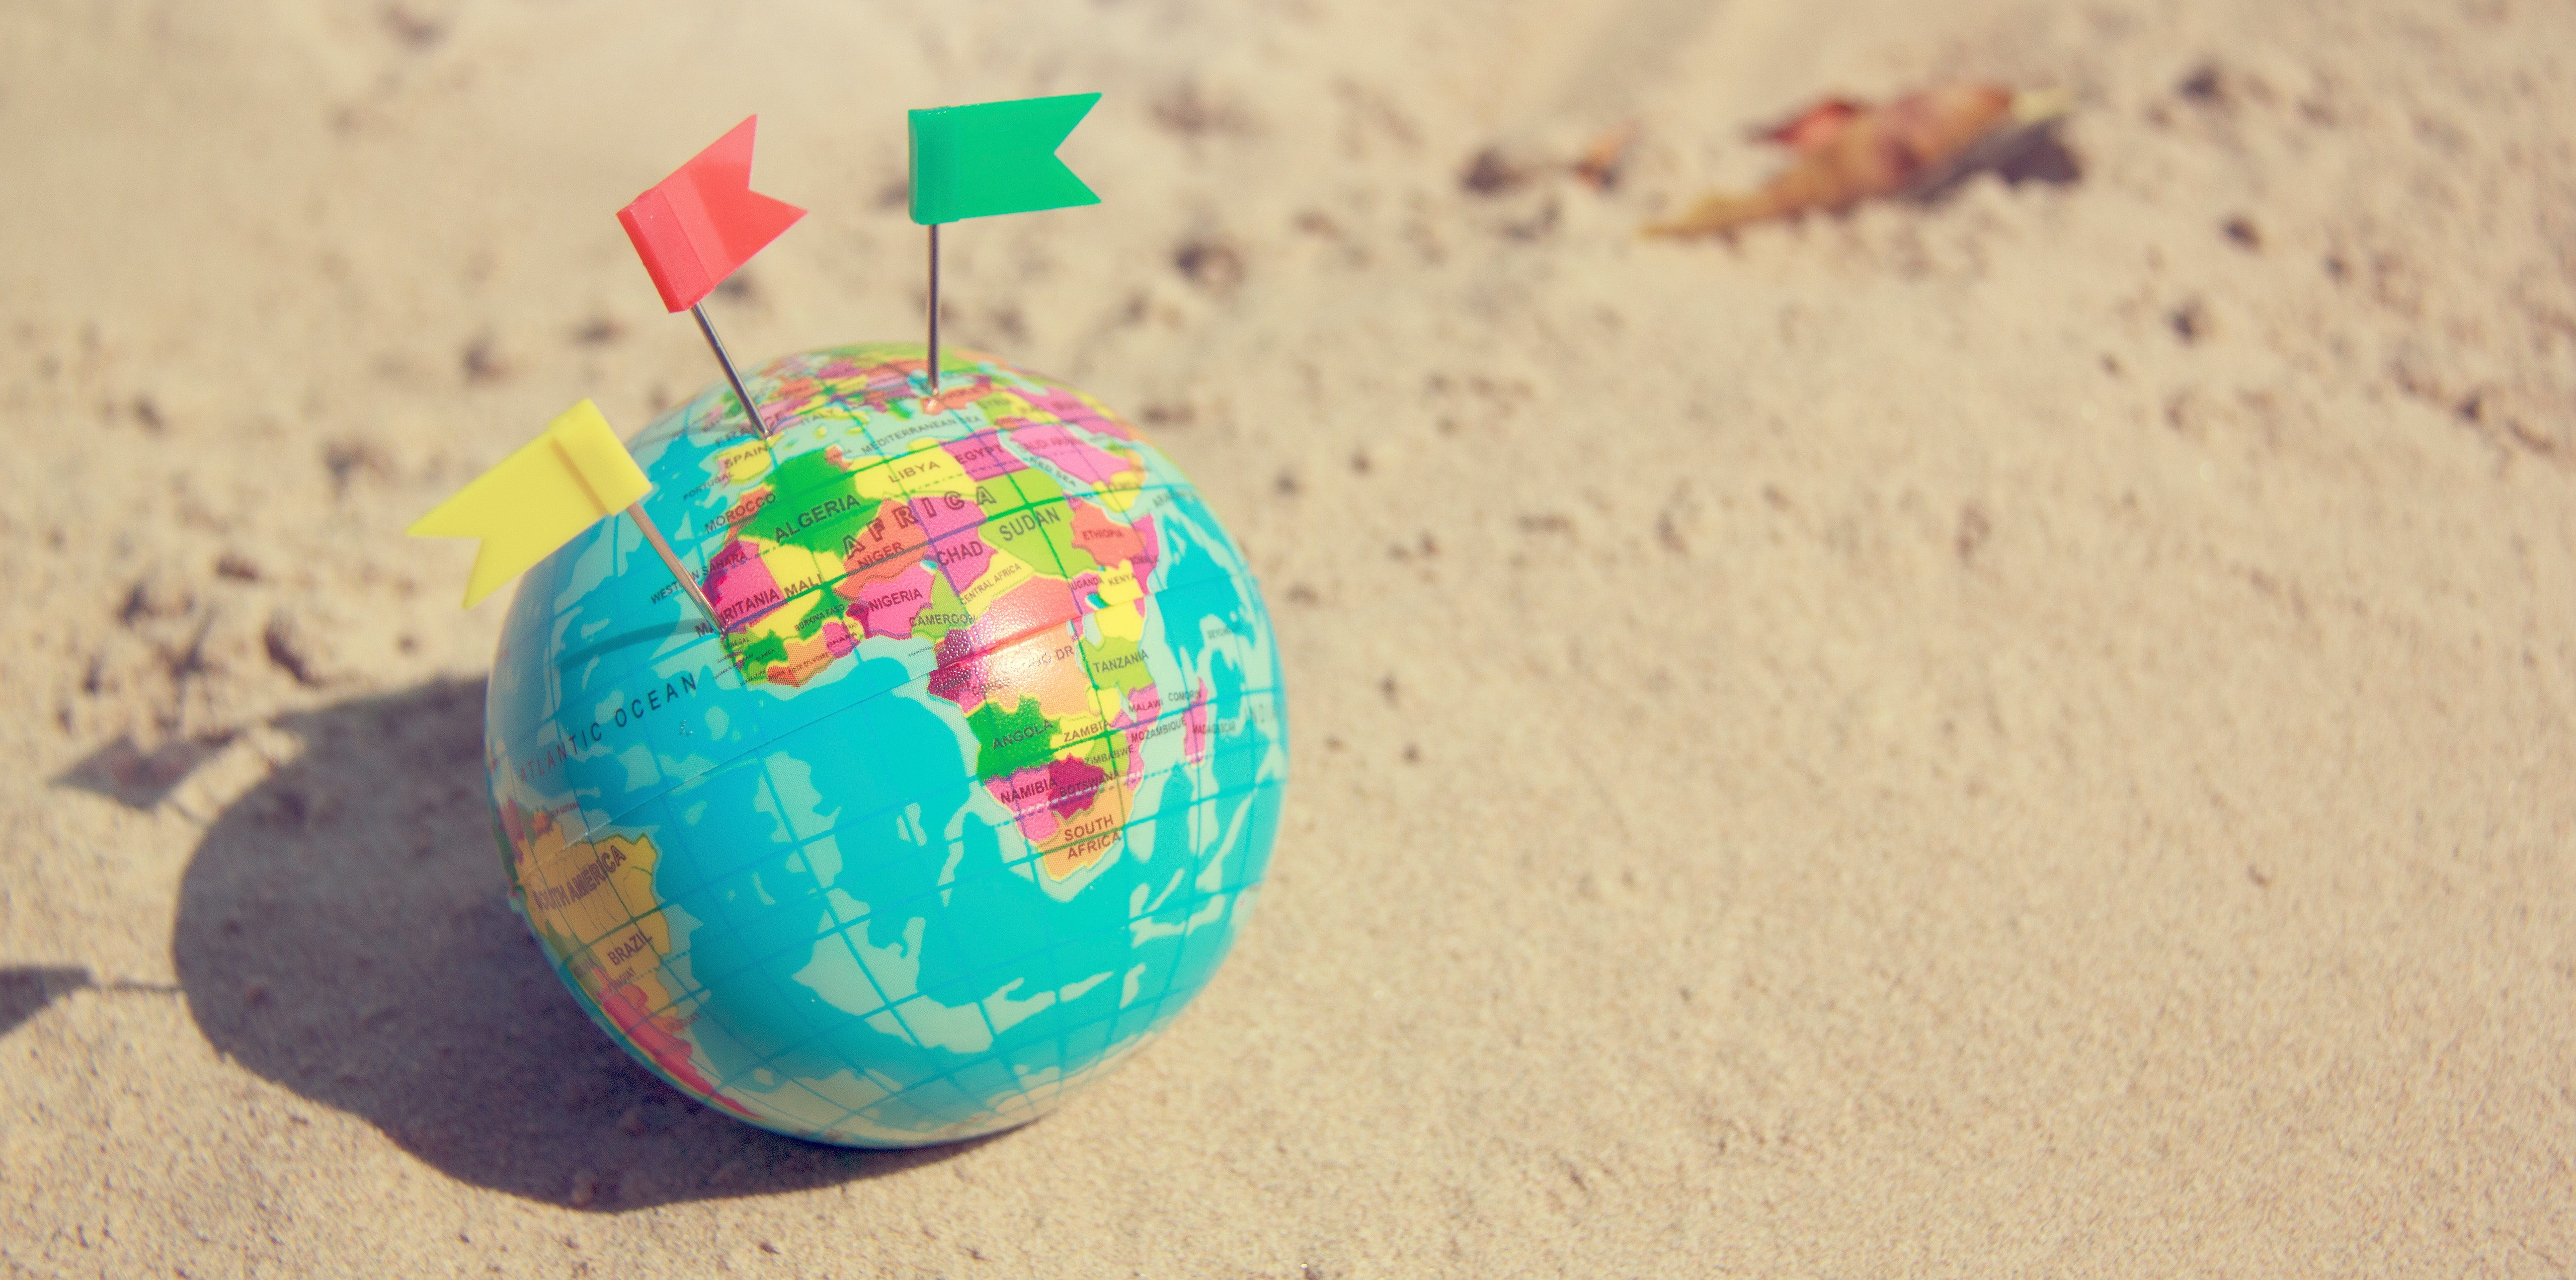 16 Great Reasons Why You Should Hire Global Technical Recruiters